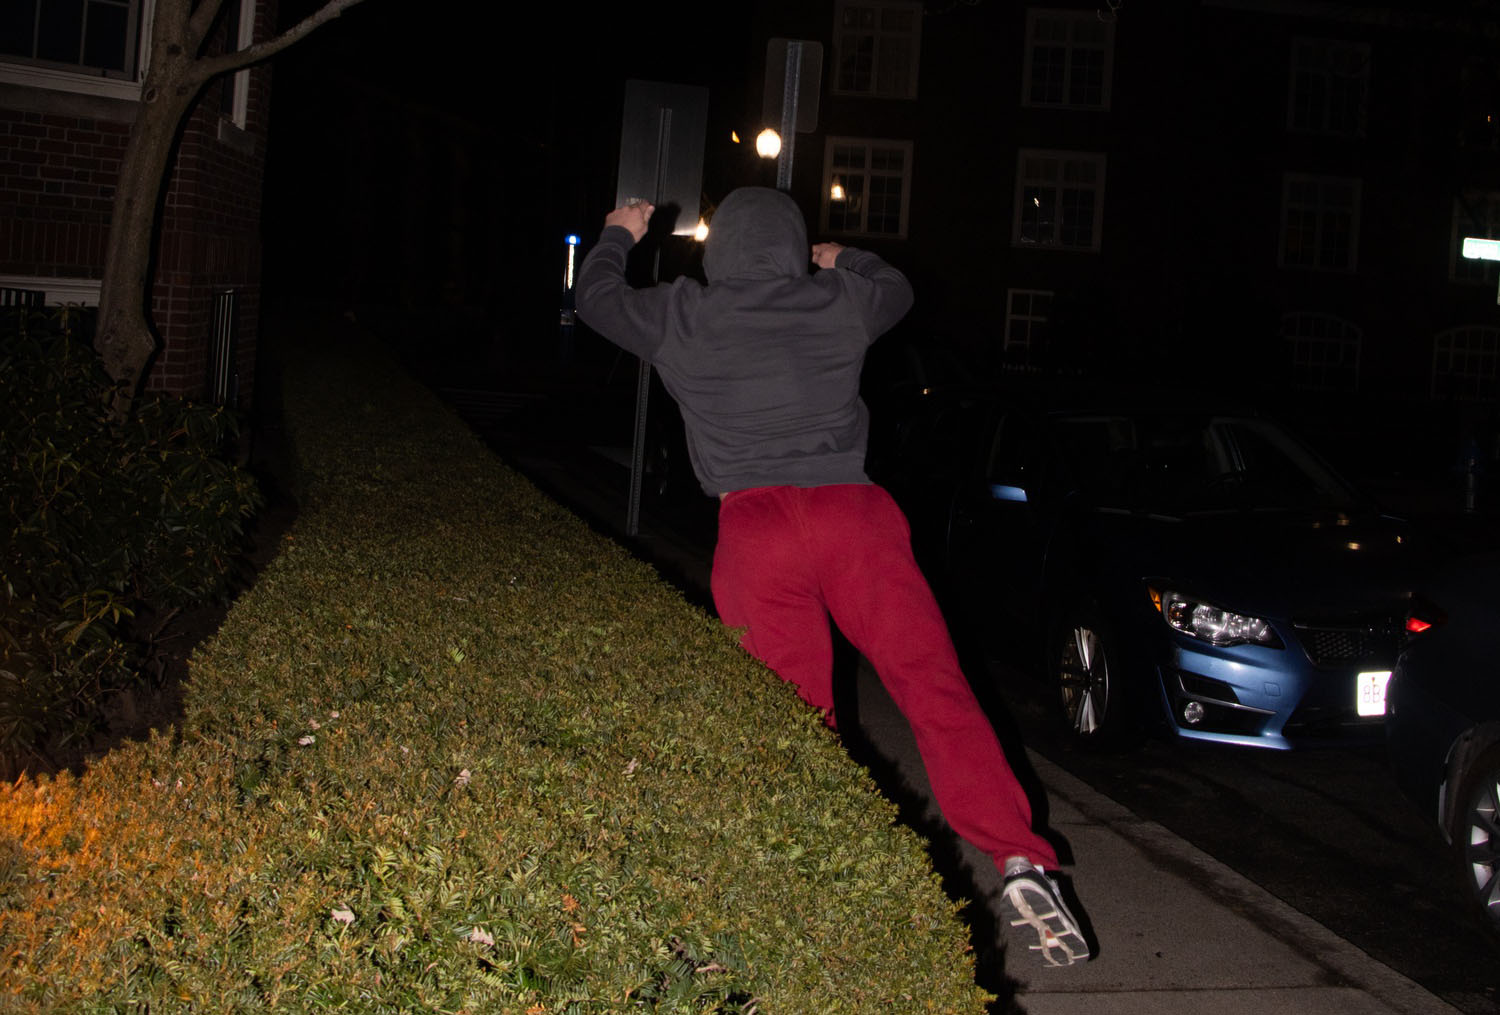 Wyatt G. Croog, a Crimson Flyby writer, jumps into a bush outside of Hurlbut Hall. Croog explored the new trend of "bush jumping" in a piece that documented the experience of jumping into different bushes around campus.